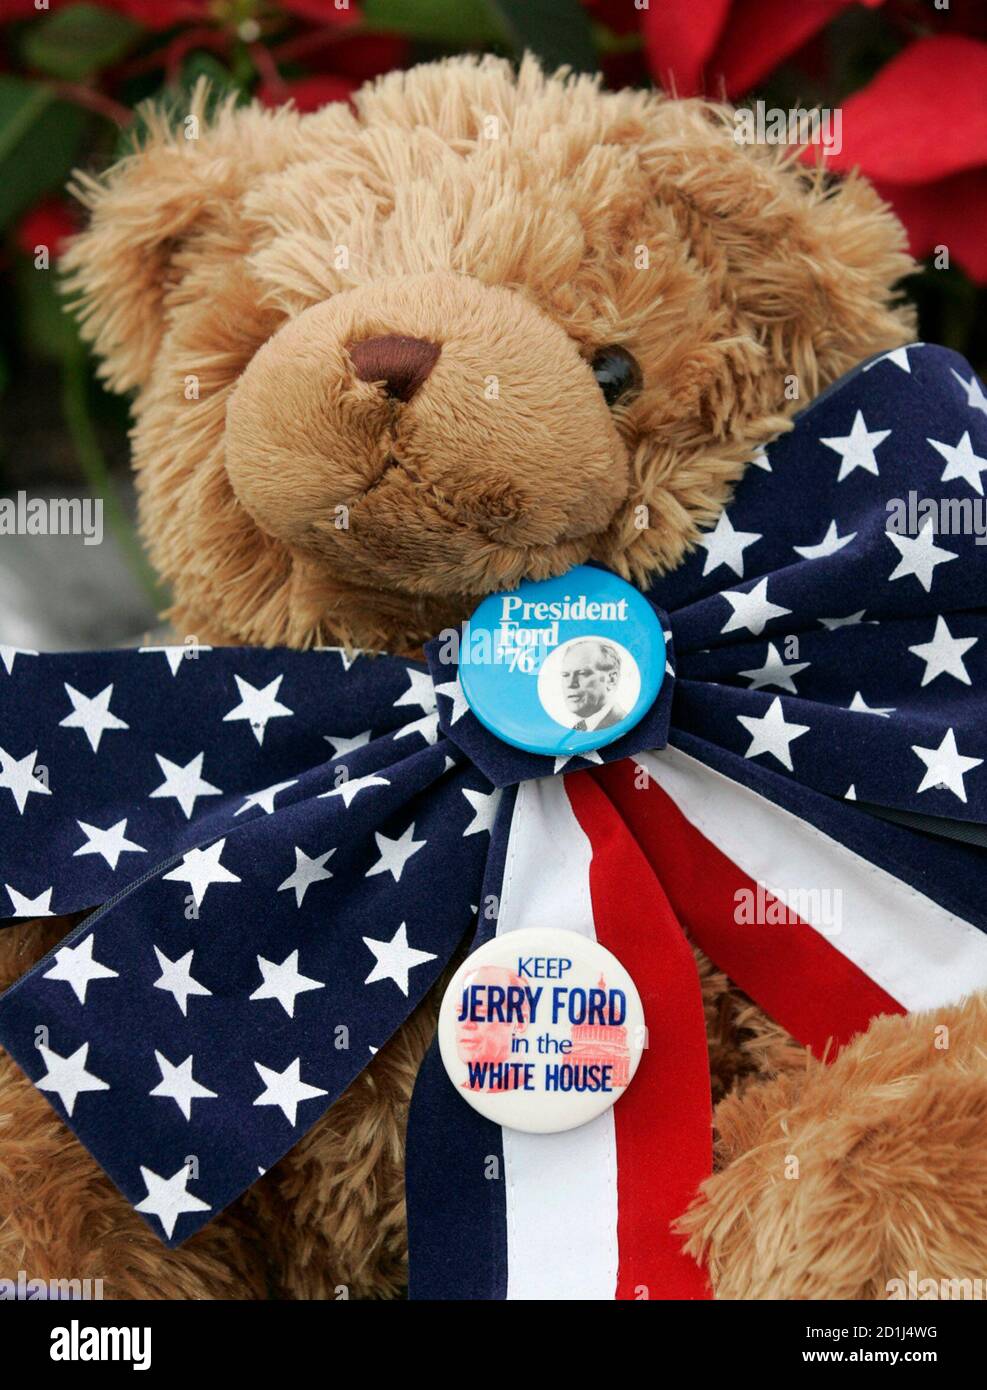 A teddy bear with political buttons sits at a memorial outside the Gerald R. Ford Museum in Grand Rapids, Michigan where people left items in memory of the former president, December 27, 2006.   The oldest living president at 93, Ford died on December 26 of undisclosed causes at his home in California.     REUTERS/Molly Riley   (UNITED STATES) Stock Photo